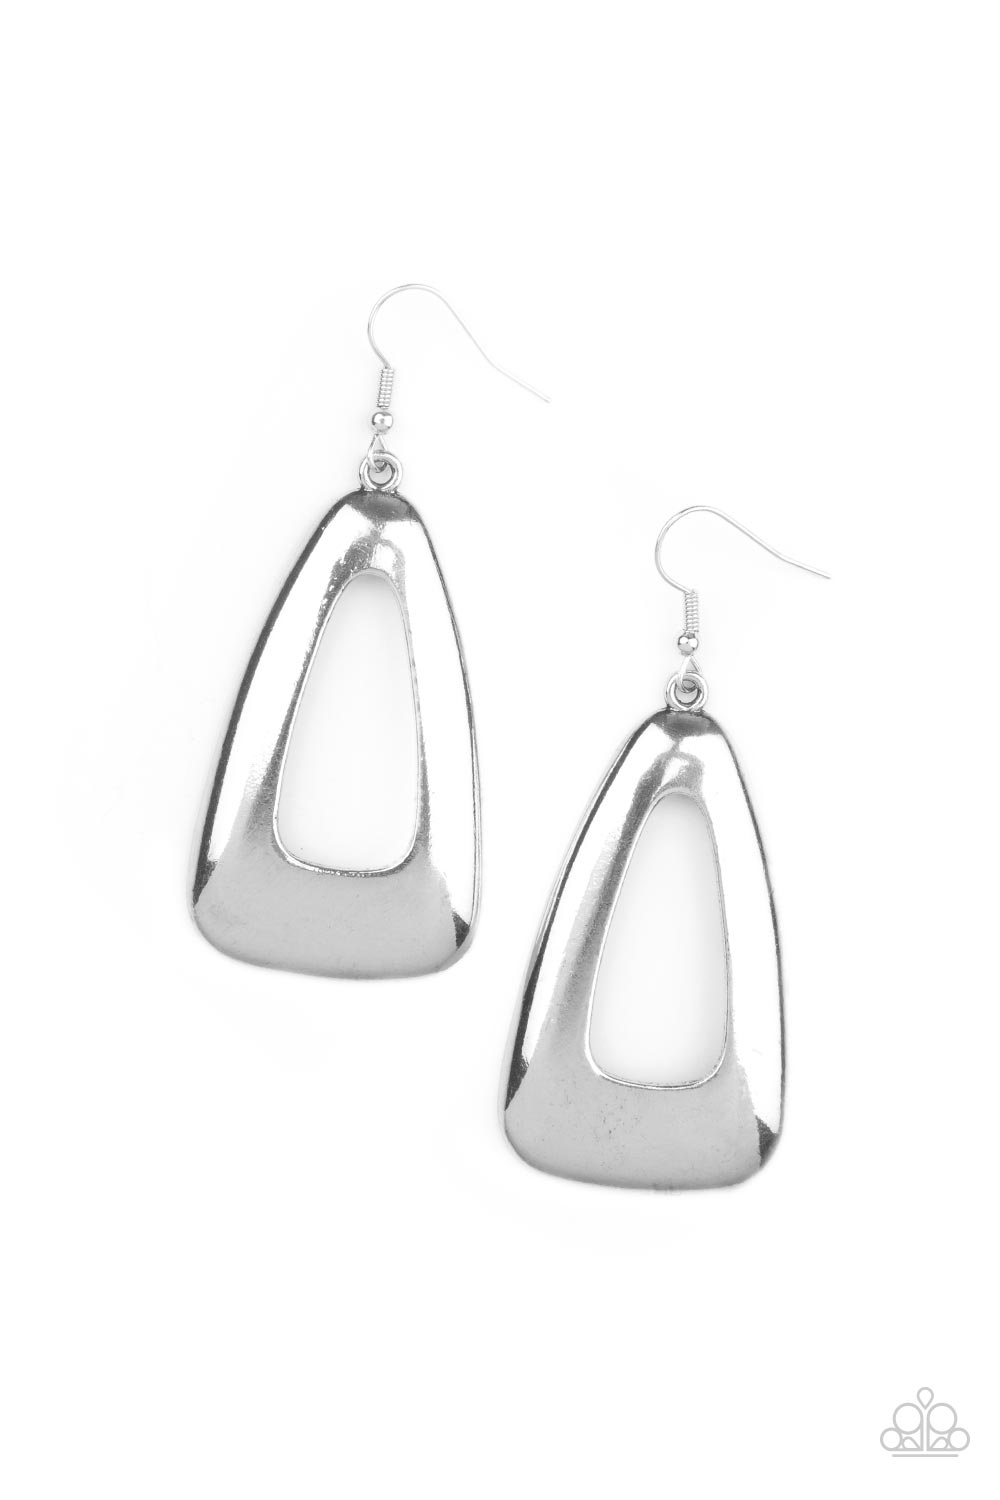 Irresistibly Industrial Silver Earring